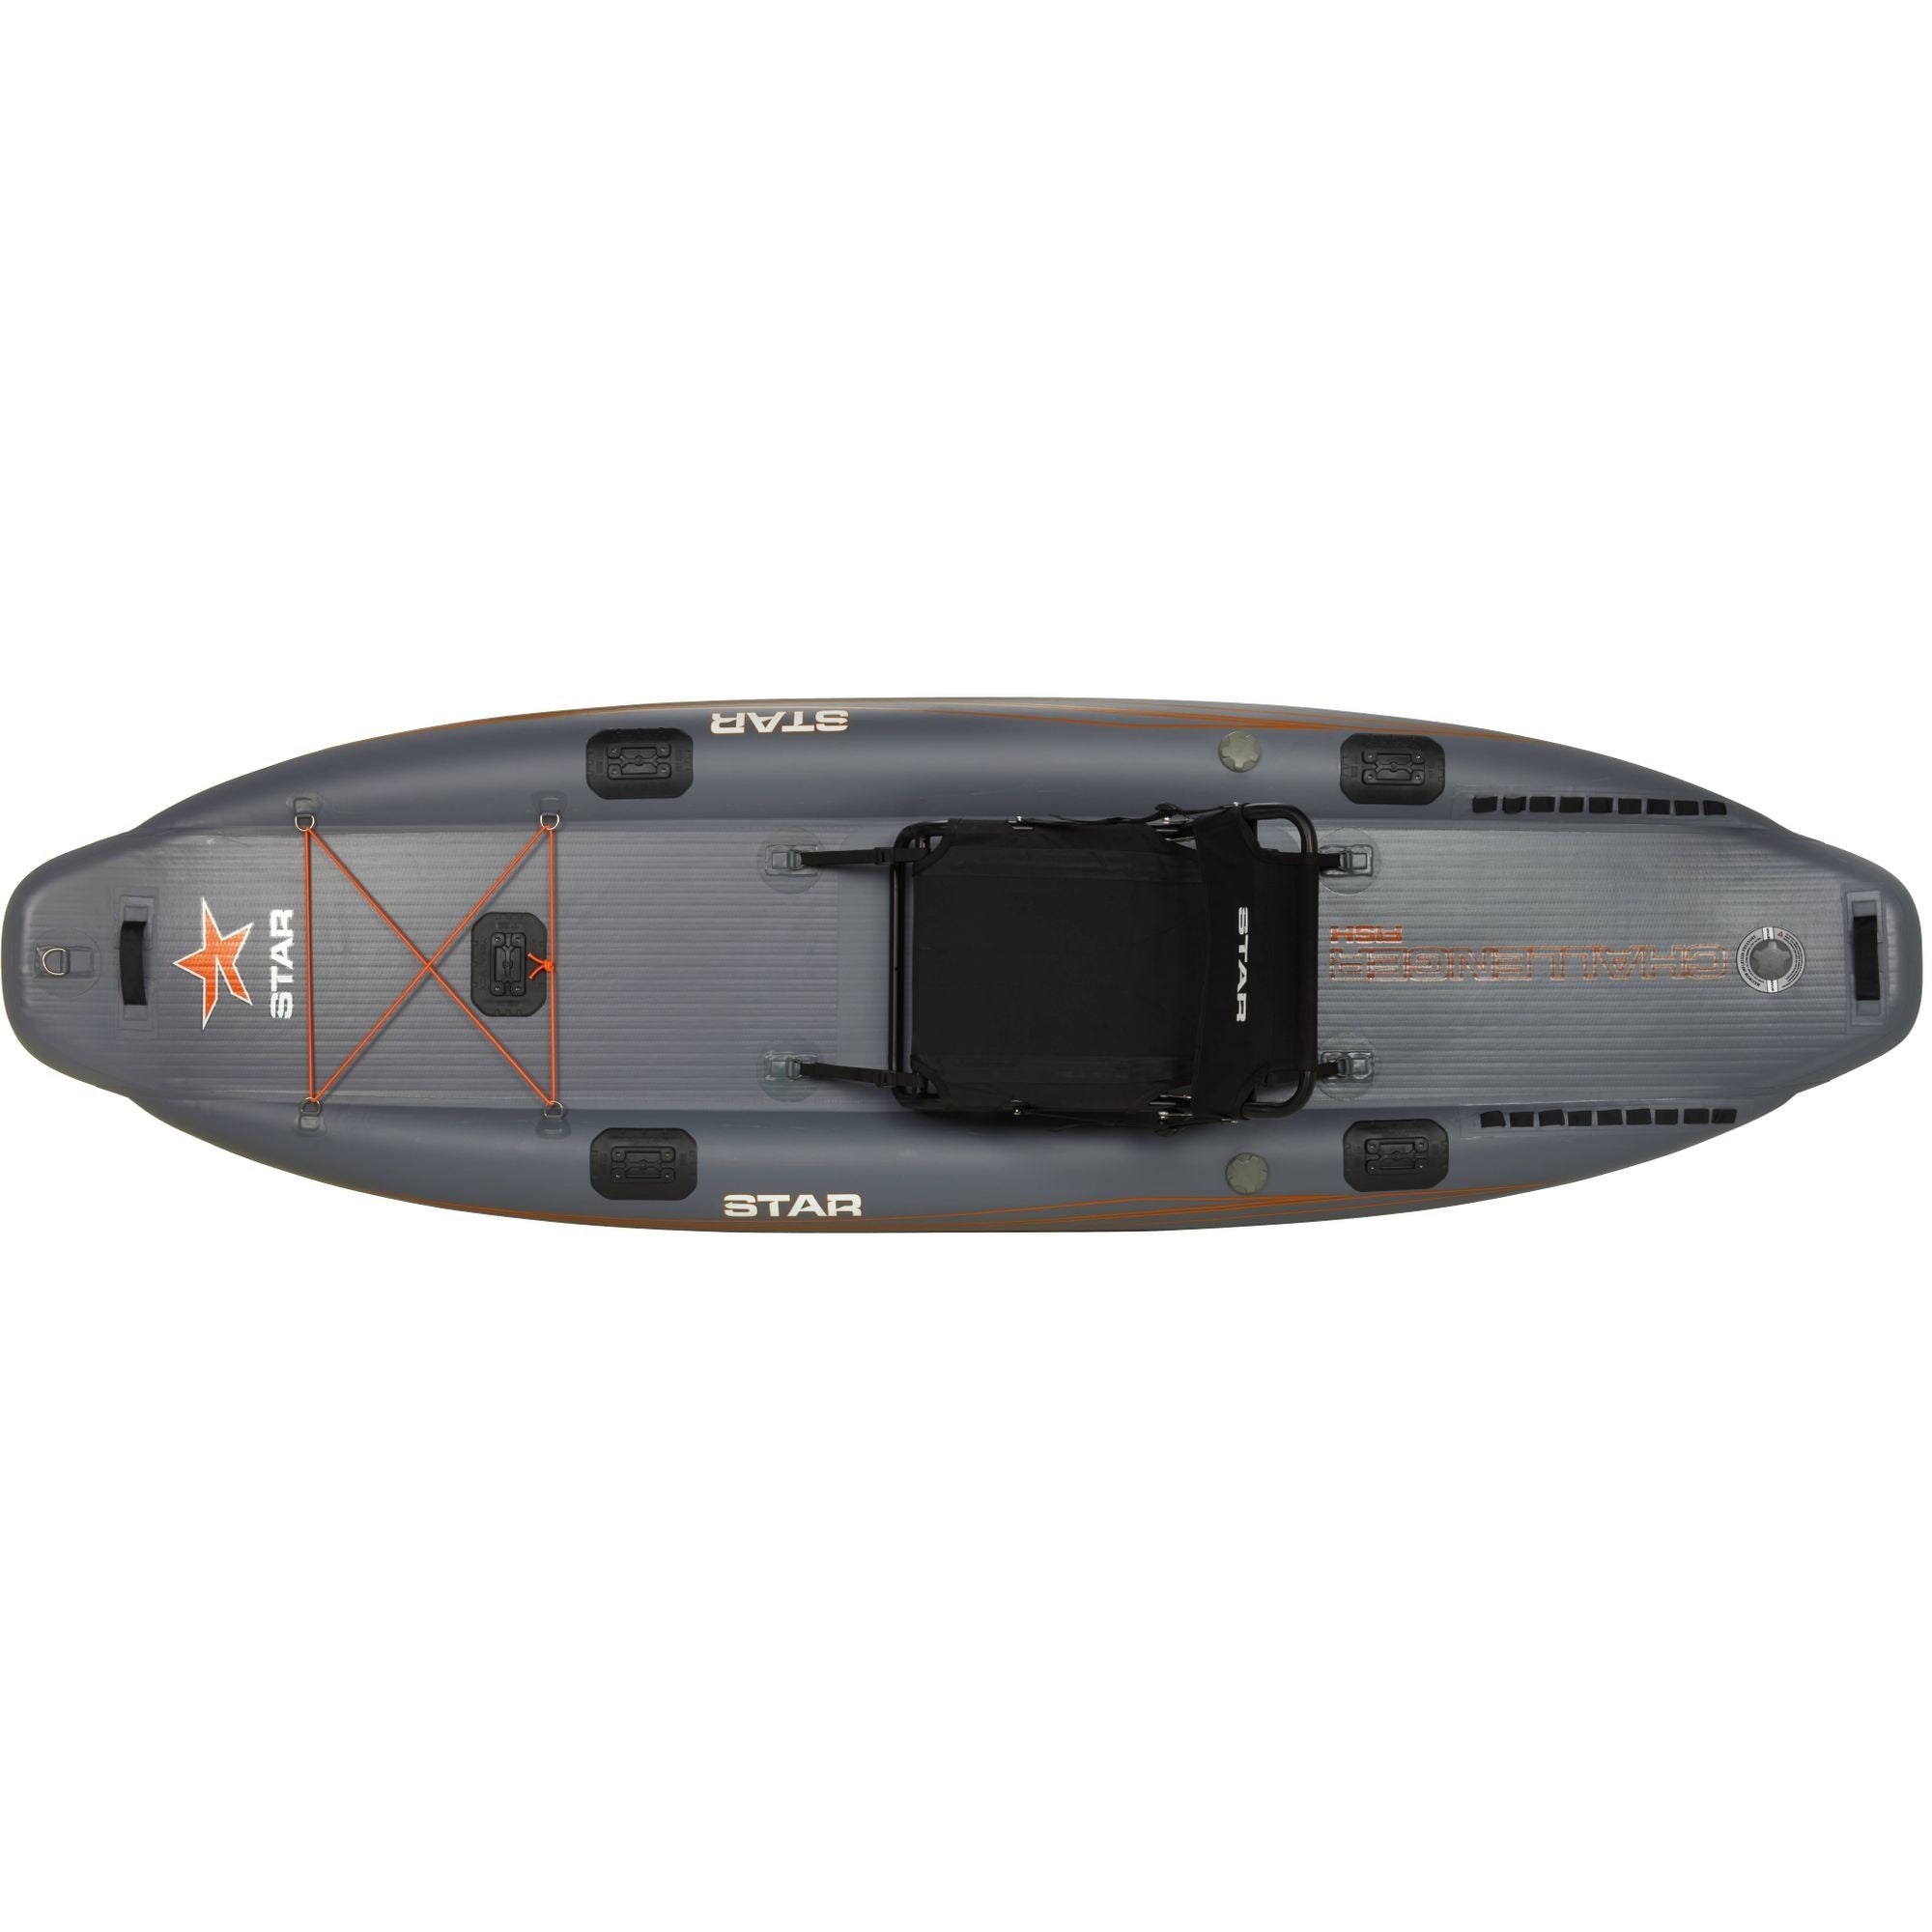 STAR - Challenger Fishing Kayak - Frontenac Outfitters